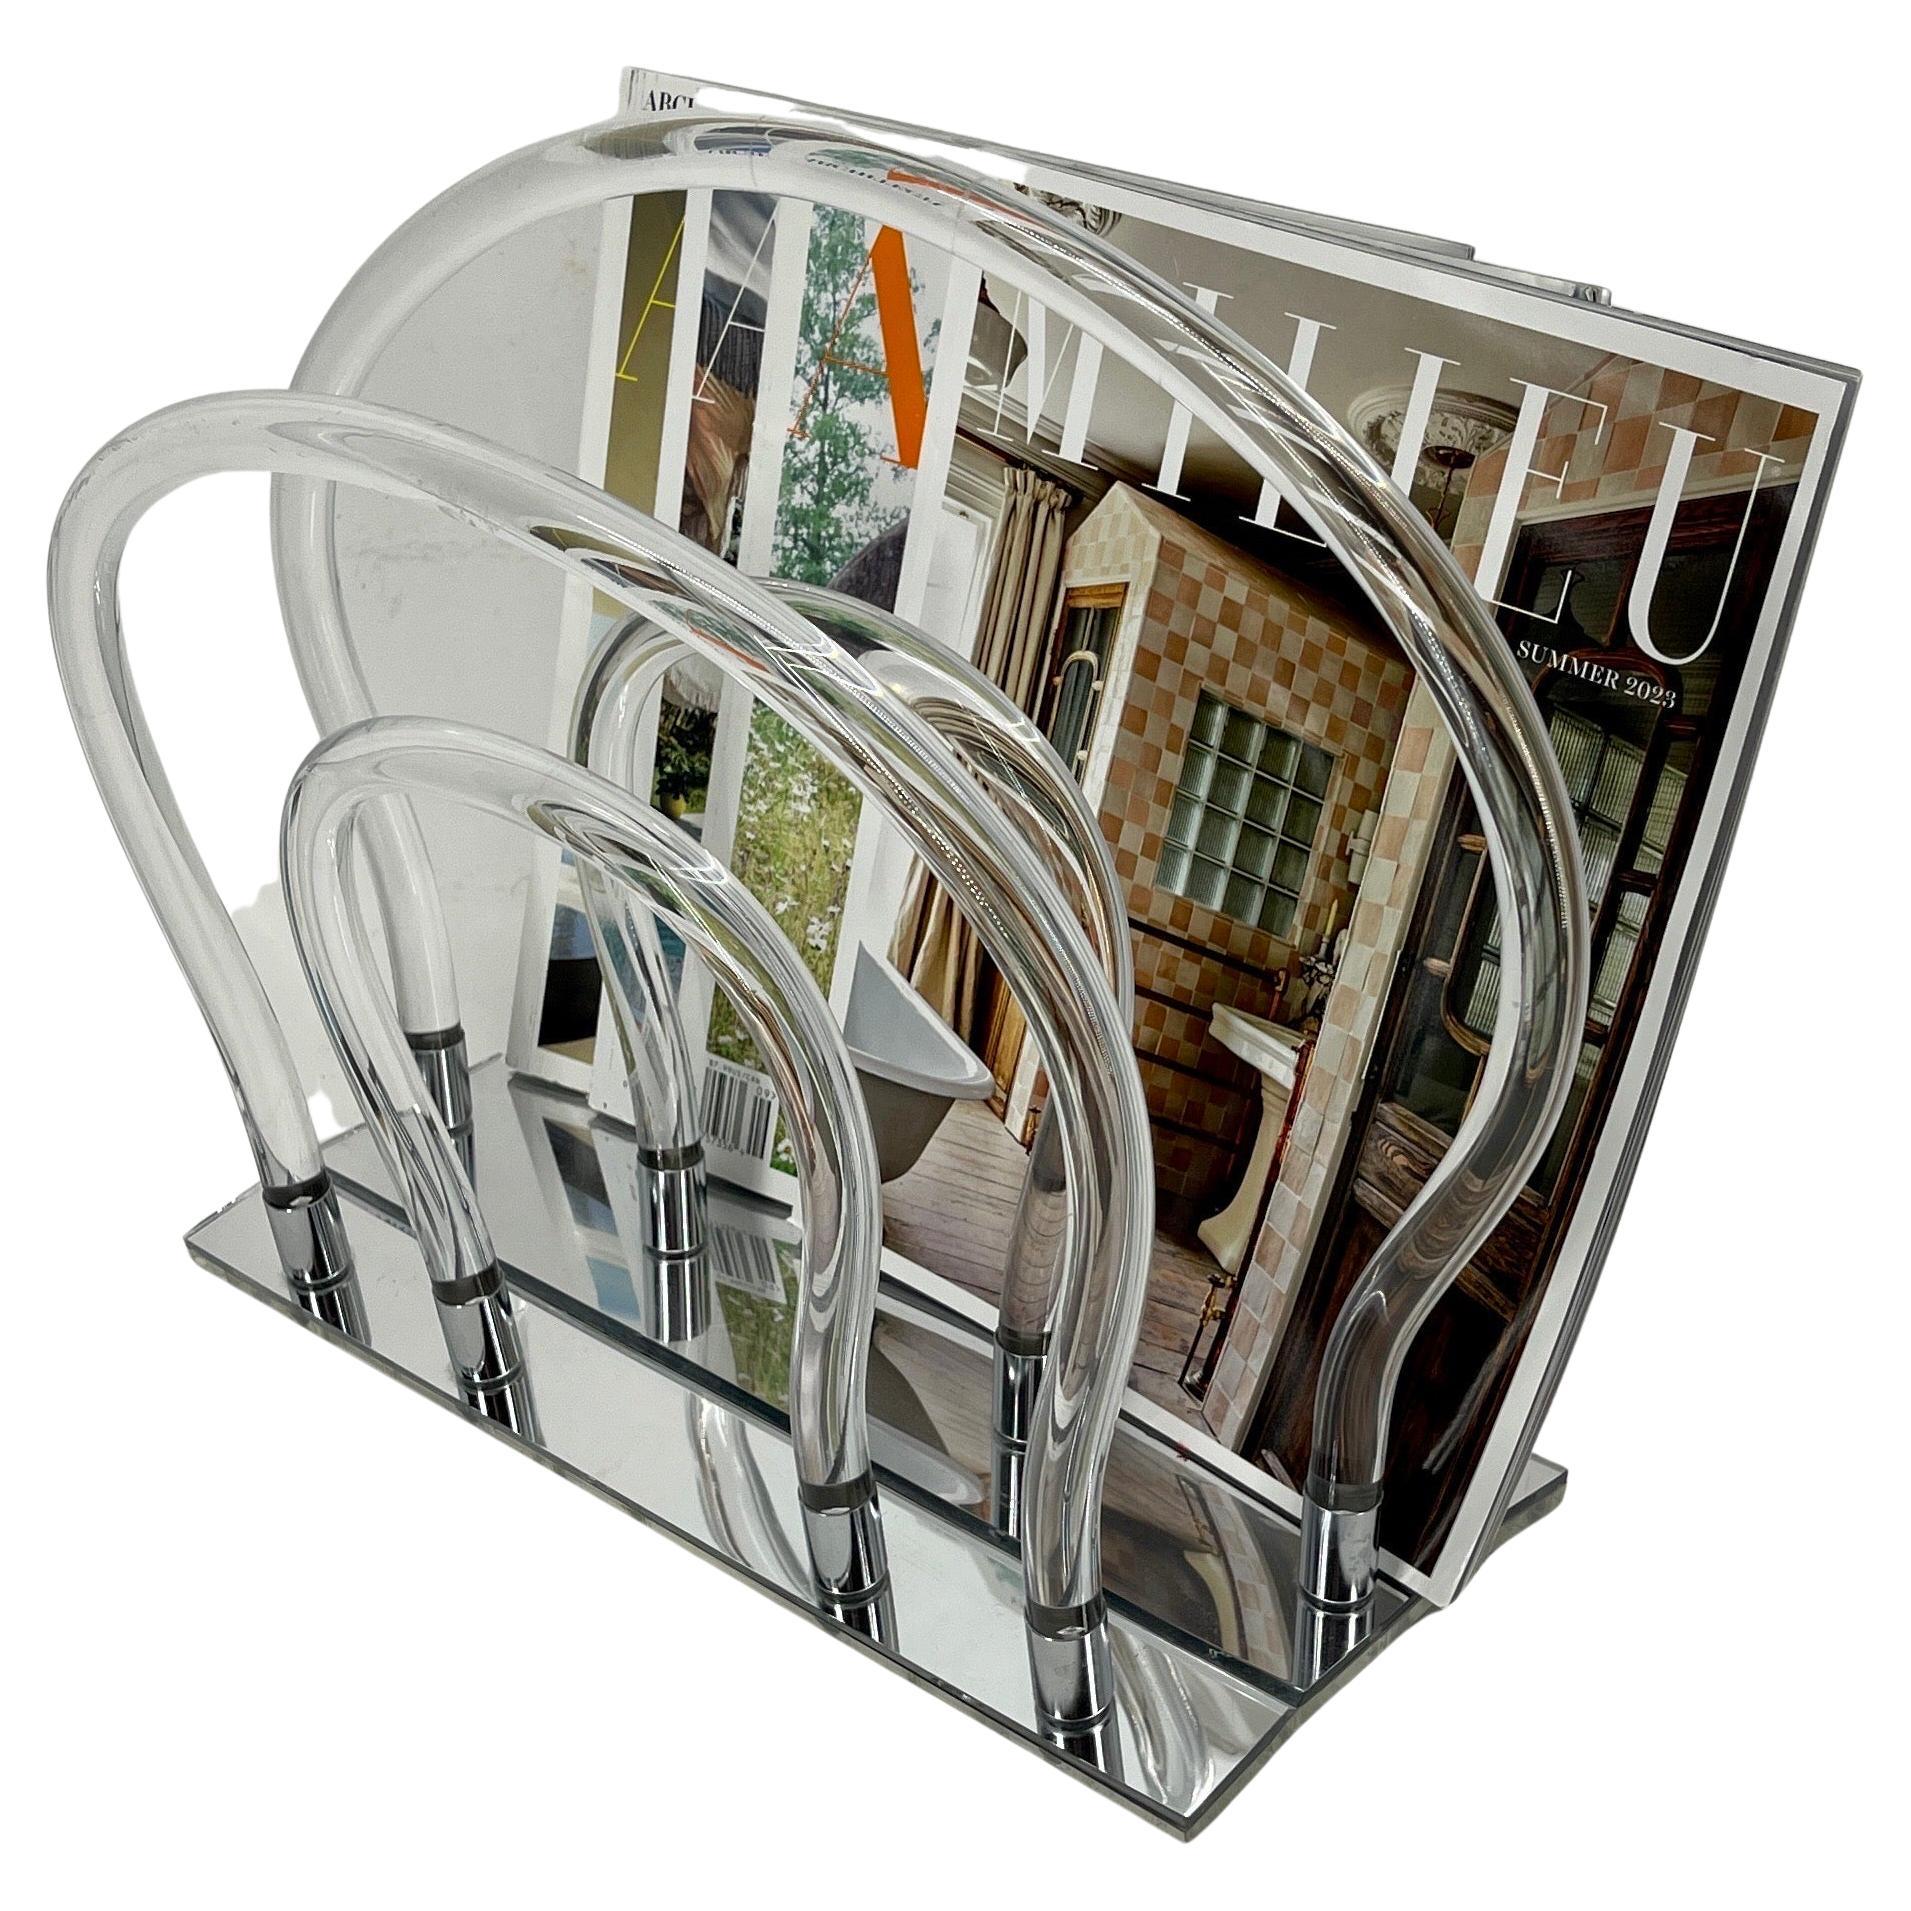 Vintage Dorothy Thorpe Waterfall Magazine Rack in Lucite, Mirror-glass and Chrome Hardware

This eye-catching Hollywood Regency bent lucite, chrome and mirror glass magazine rack or stand. This eye-catching piece is created from 6 bent lucite rods